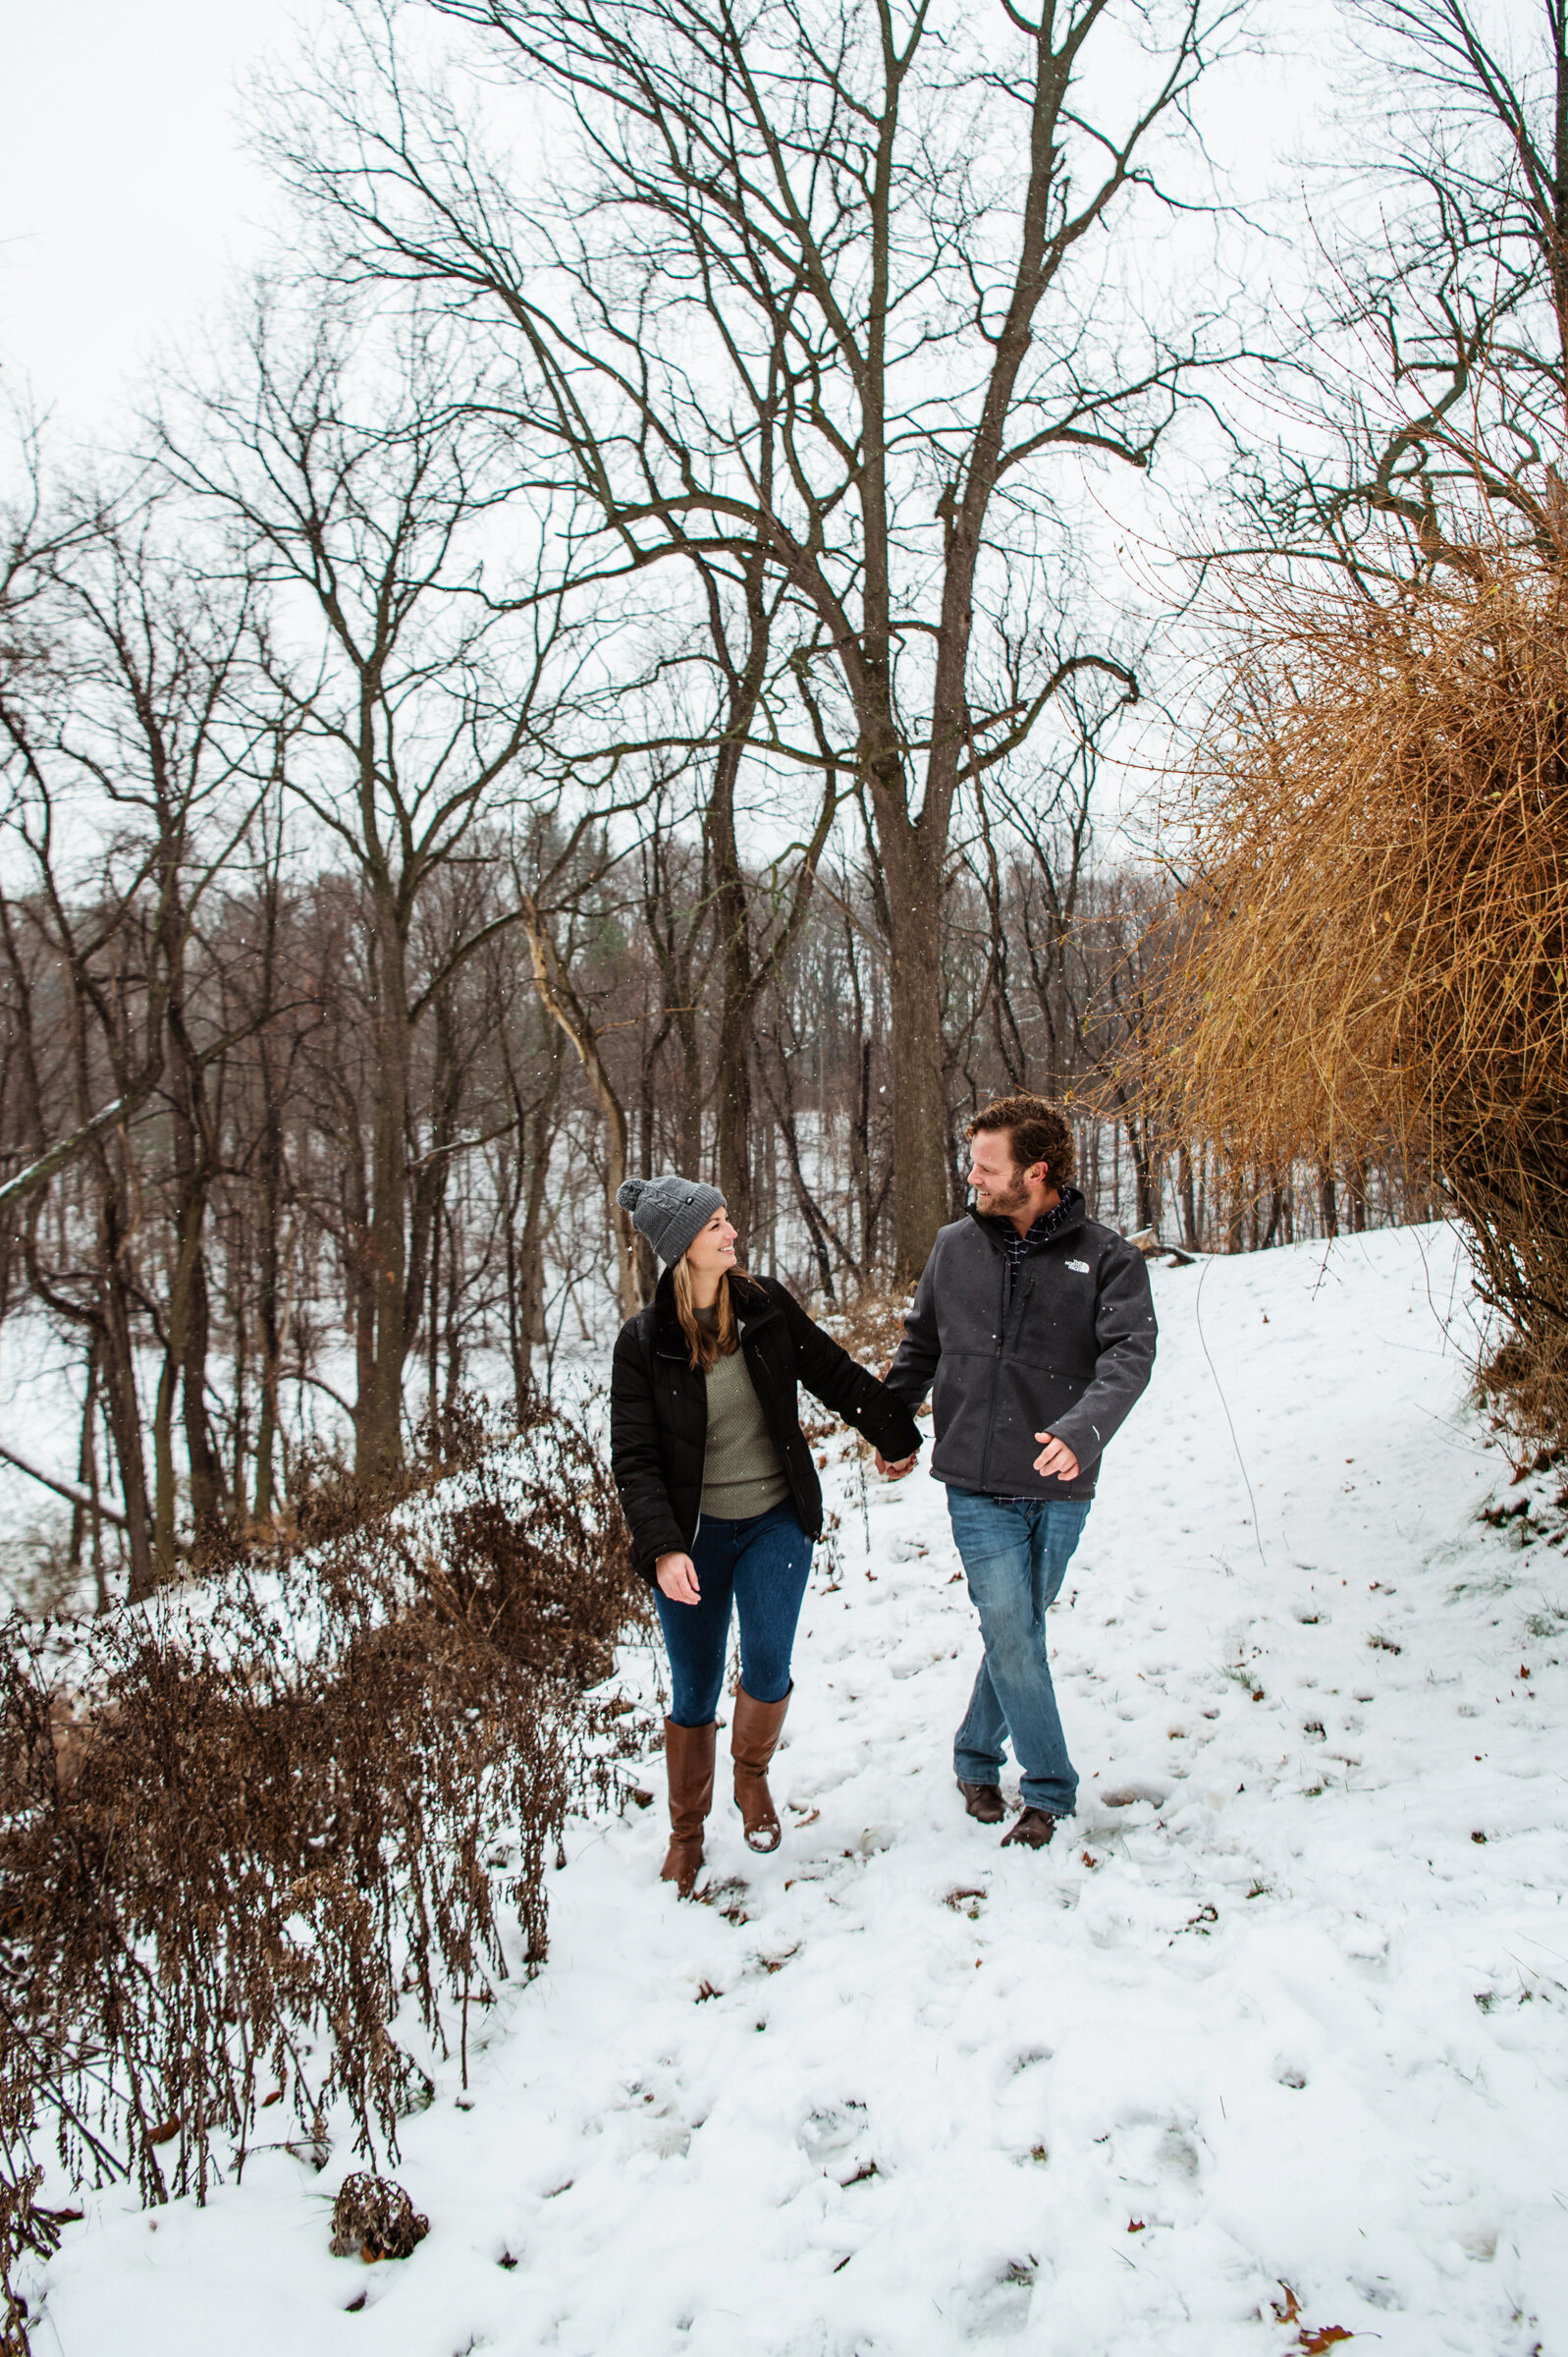 Irondequoit_Beer_Company_Durand_Eastman_Park_Rochester_Engagement_Session_JILL_STUDIO_Rochester_NY_Photographer_7245.jpg